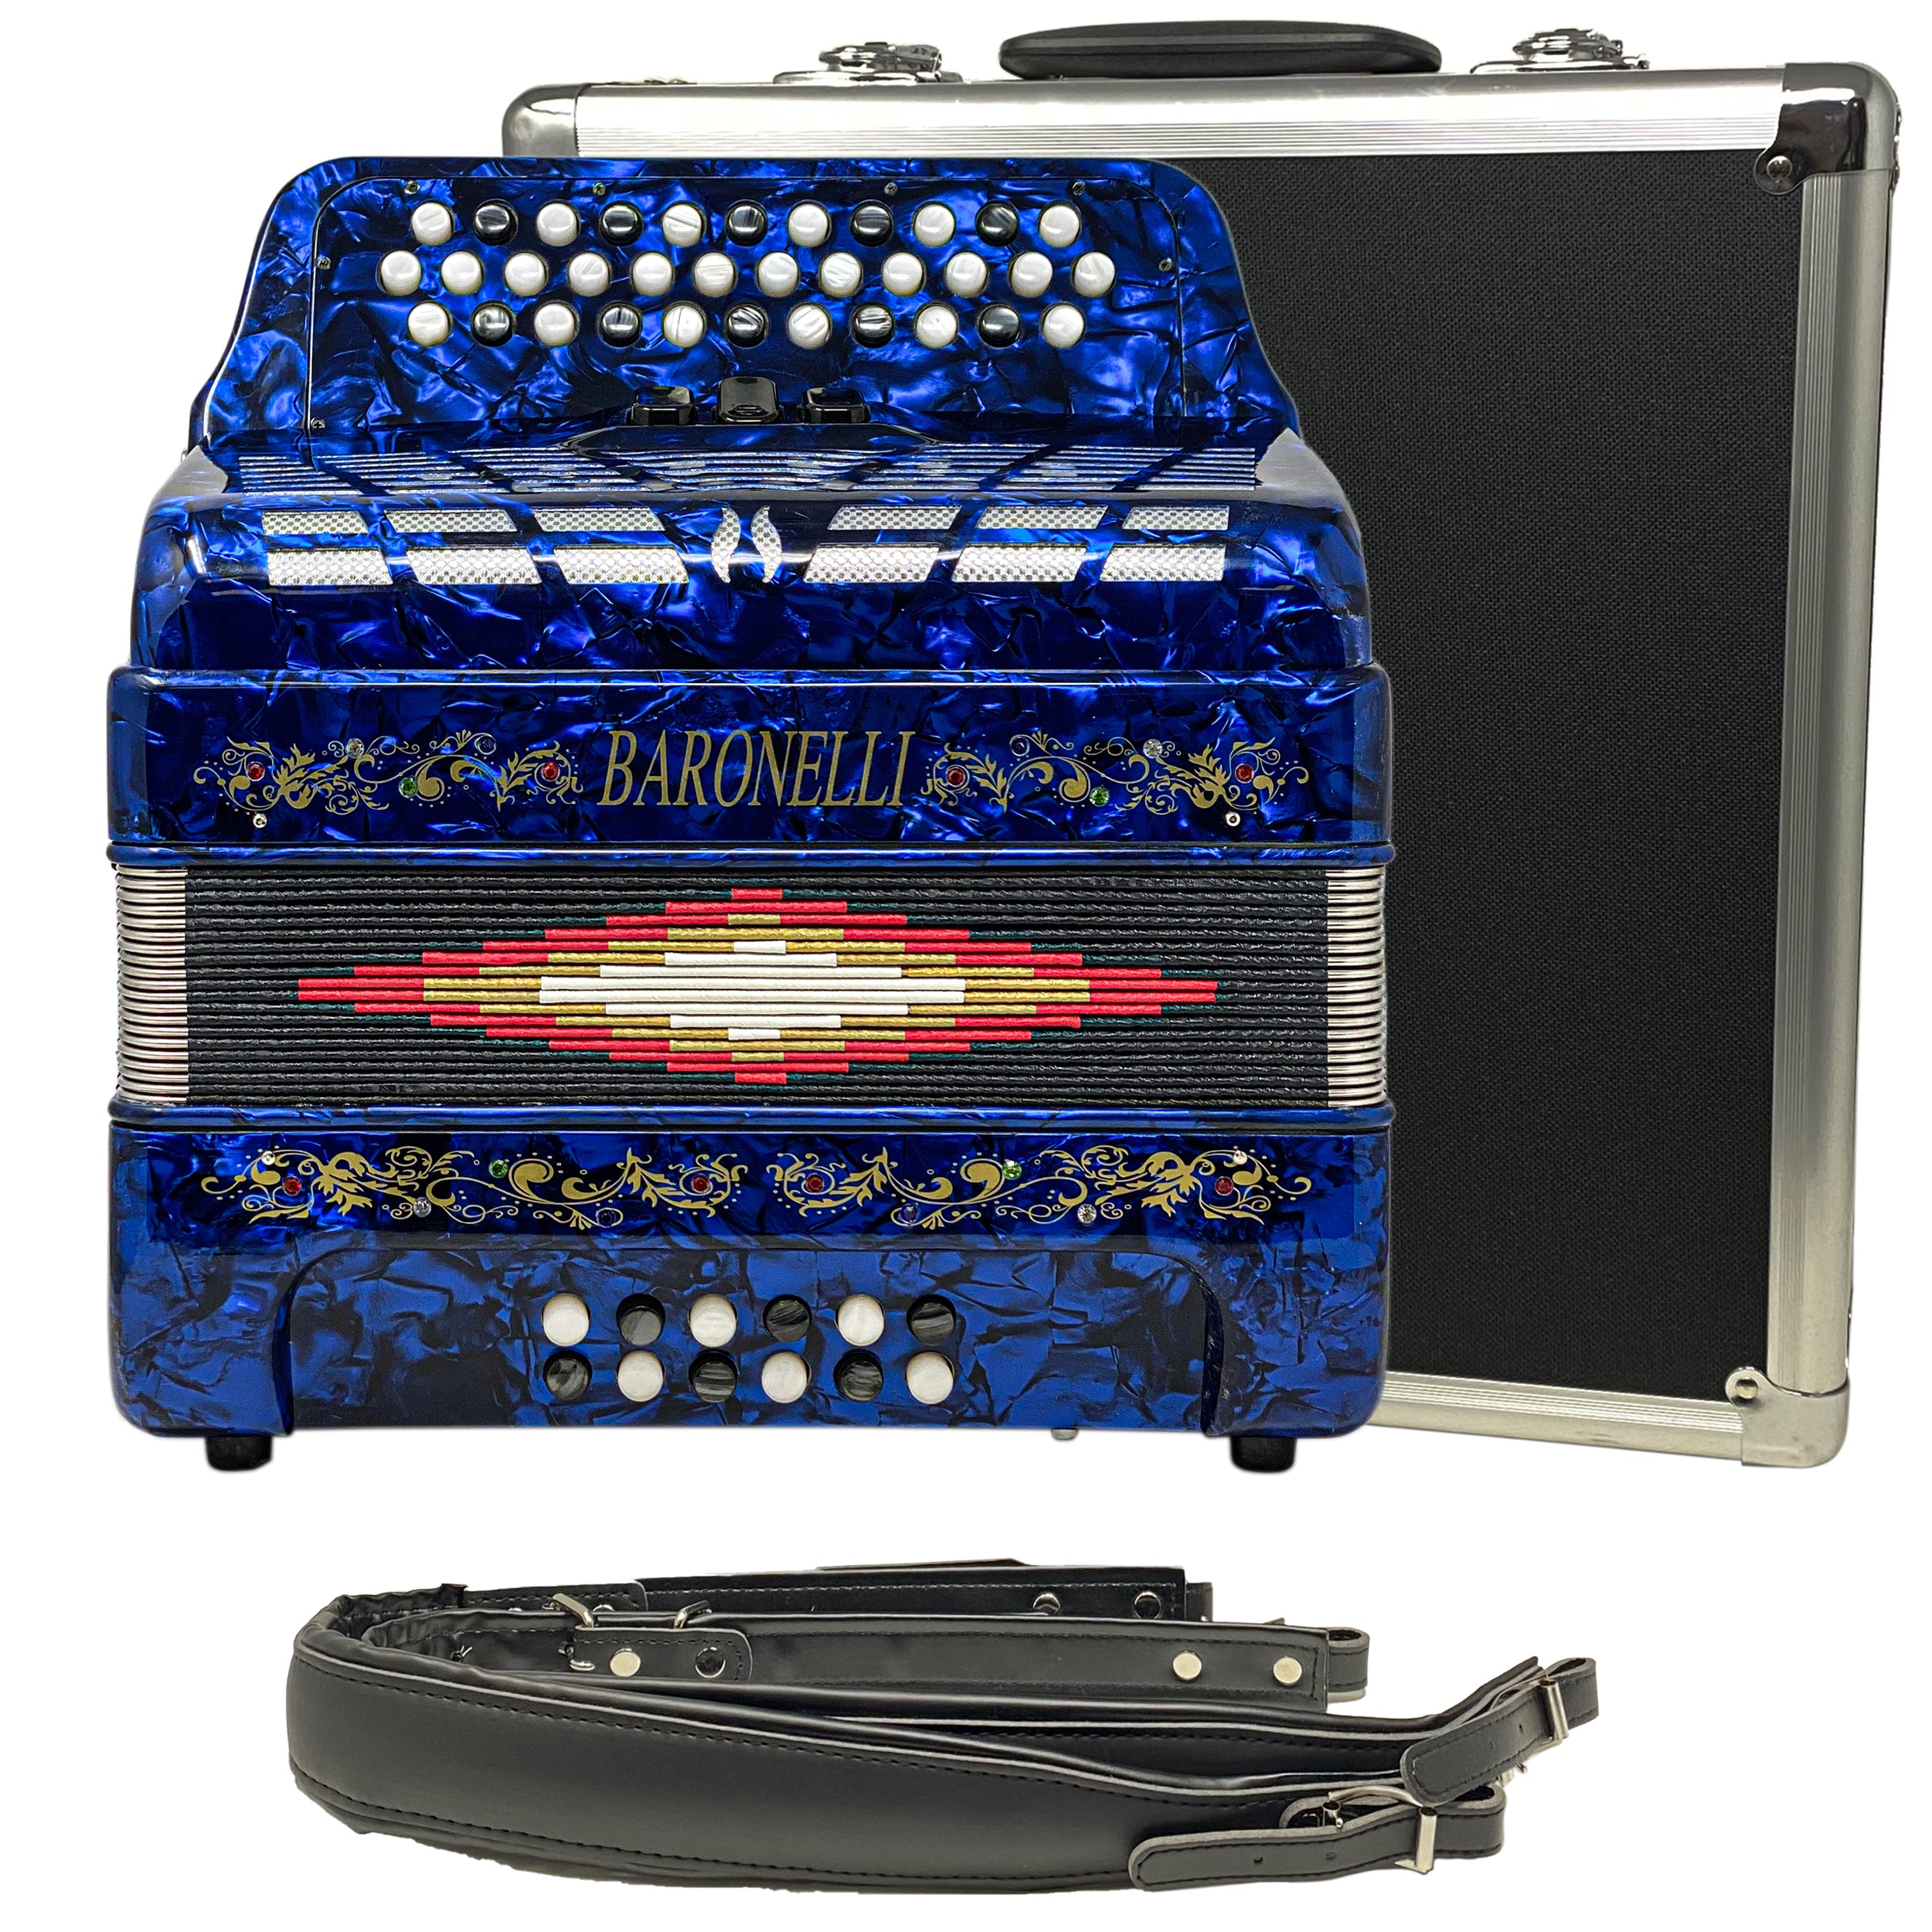 Baronelli 34 Button Accordion 12 Bass, 3 Switch, FBE, With Staps And Case, Blue